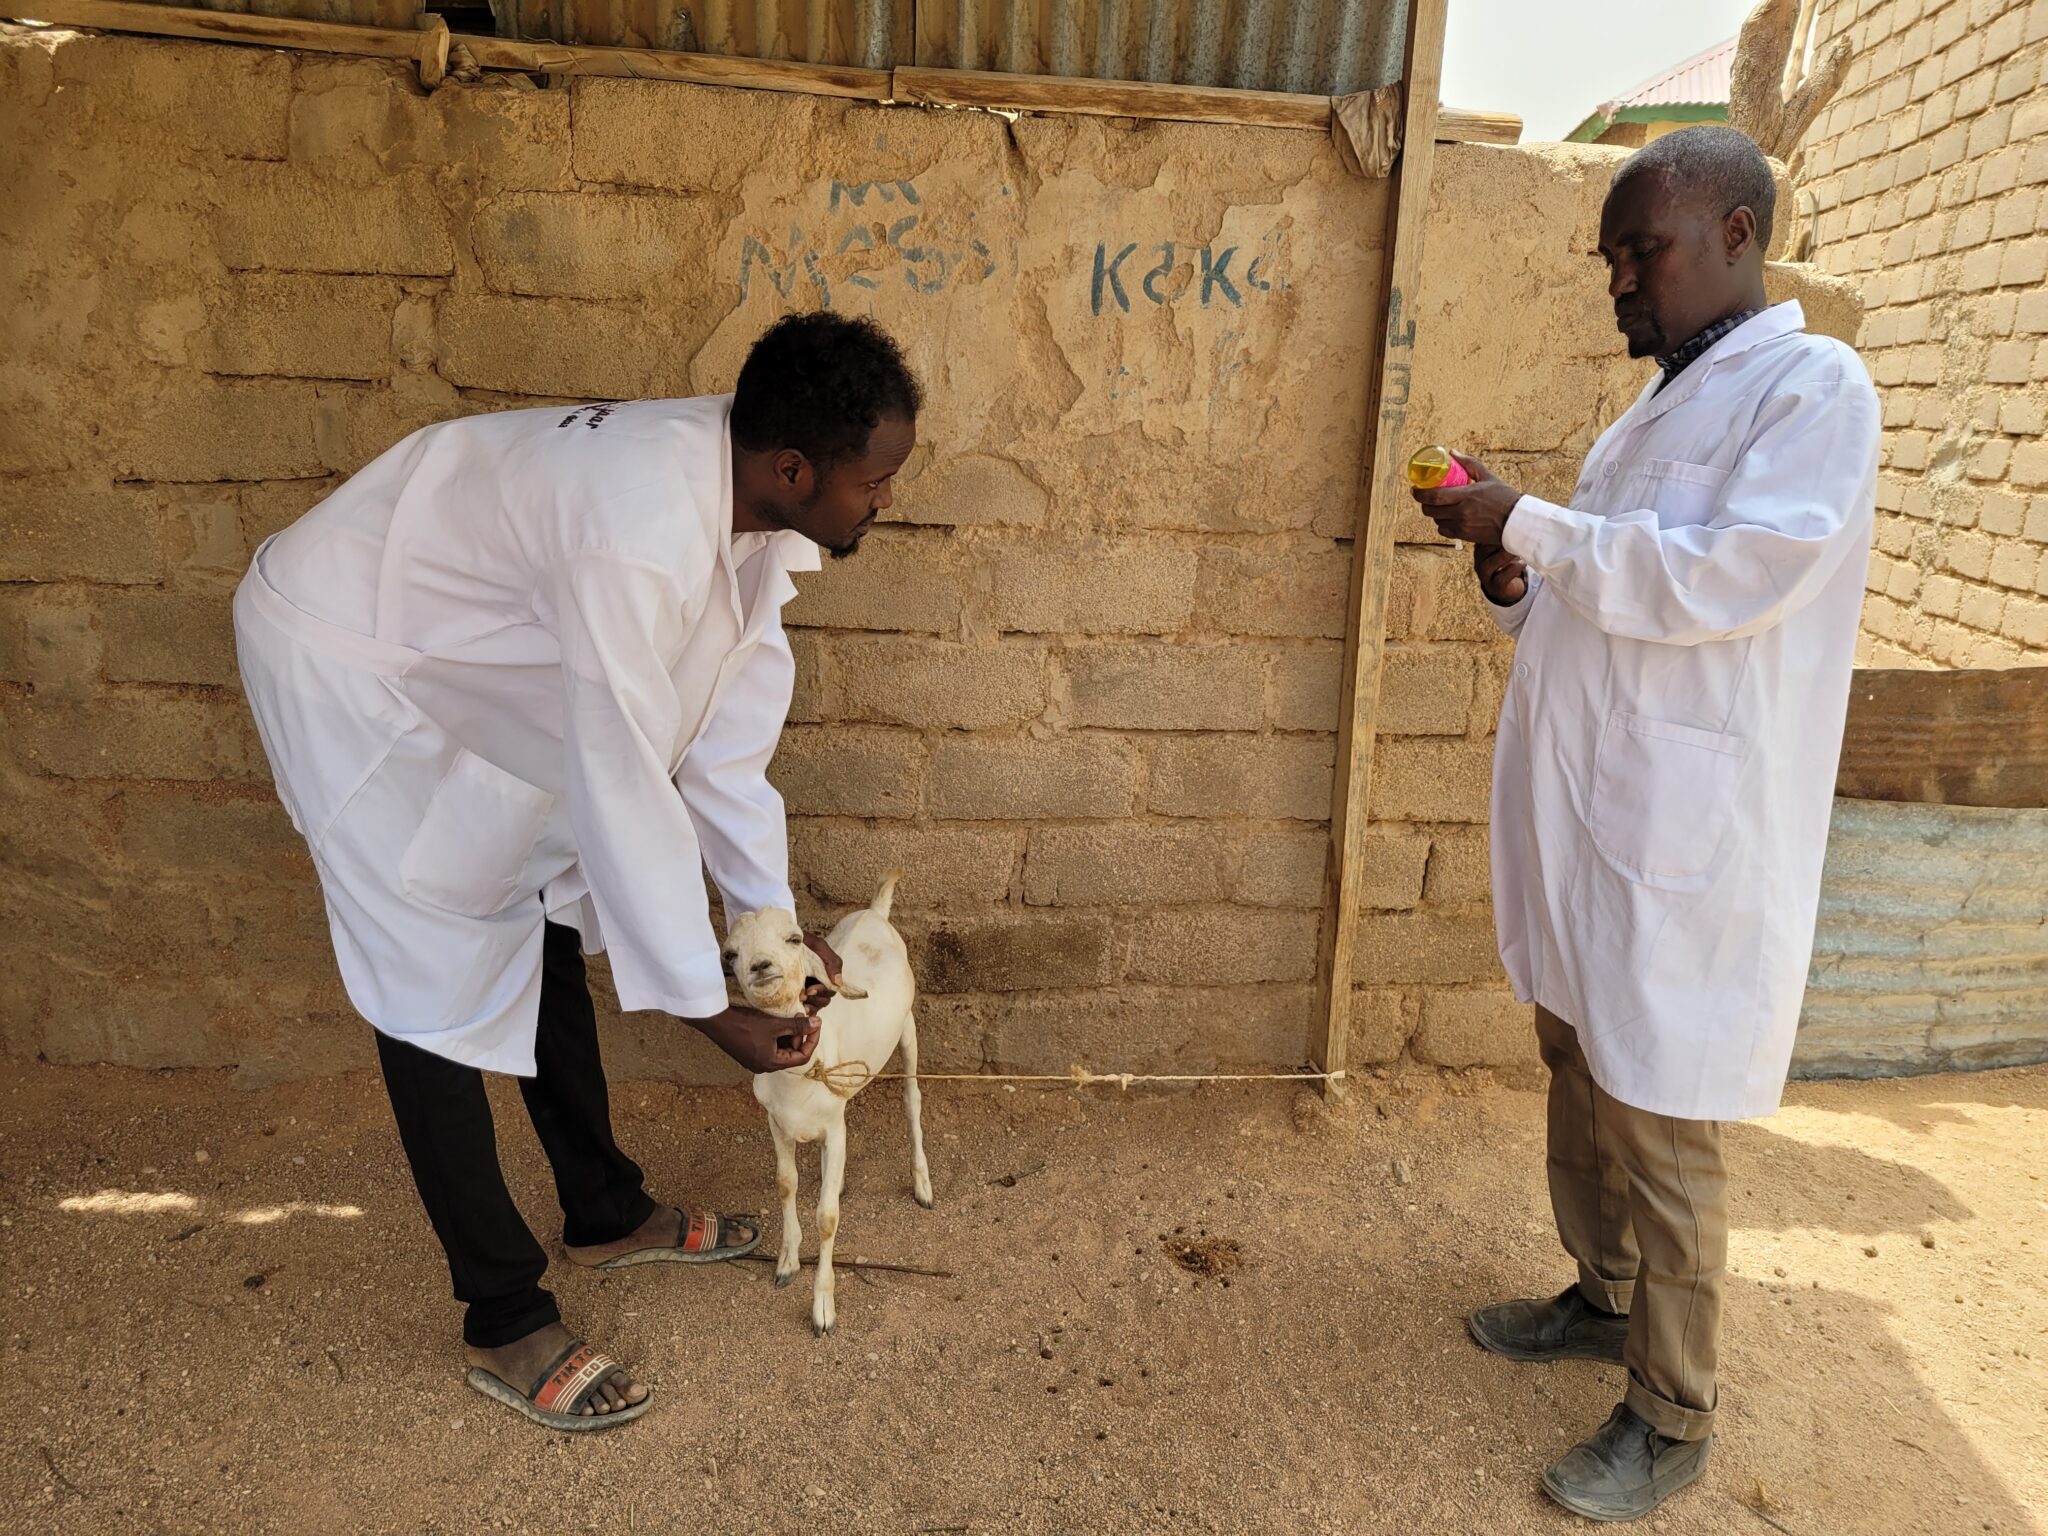 Two men in lab coats one of them is holding a goat